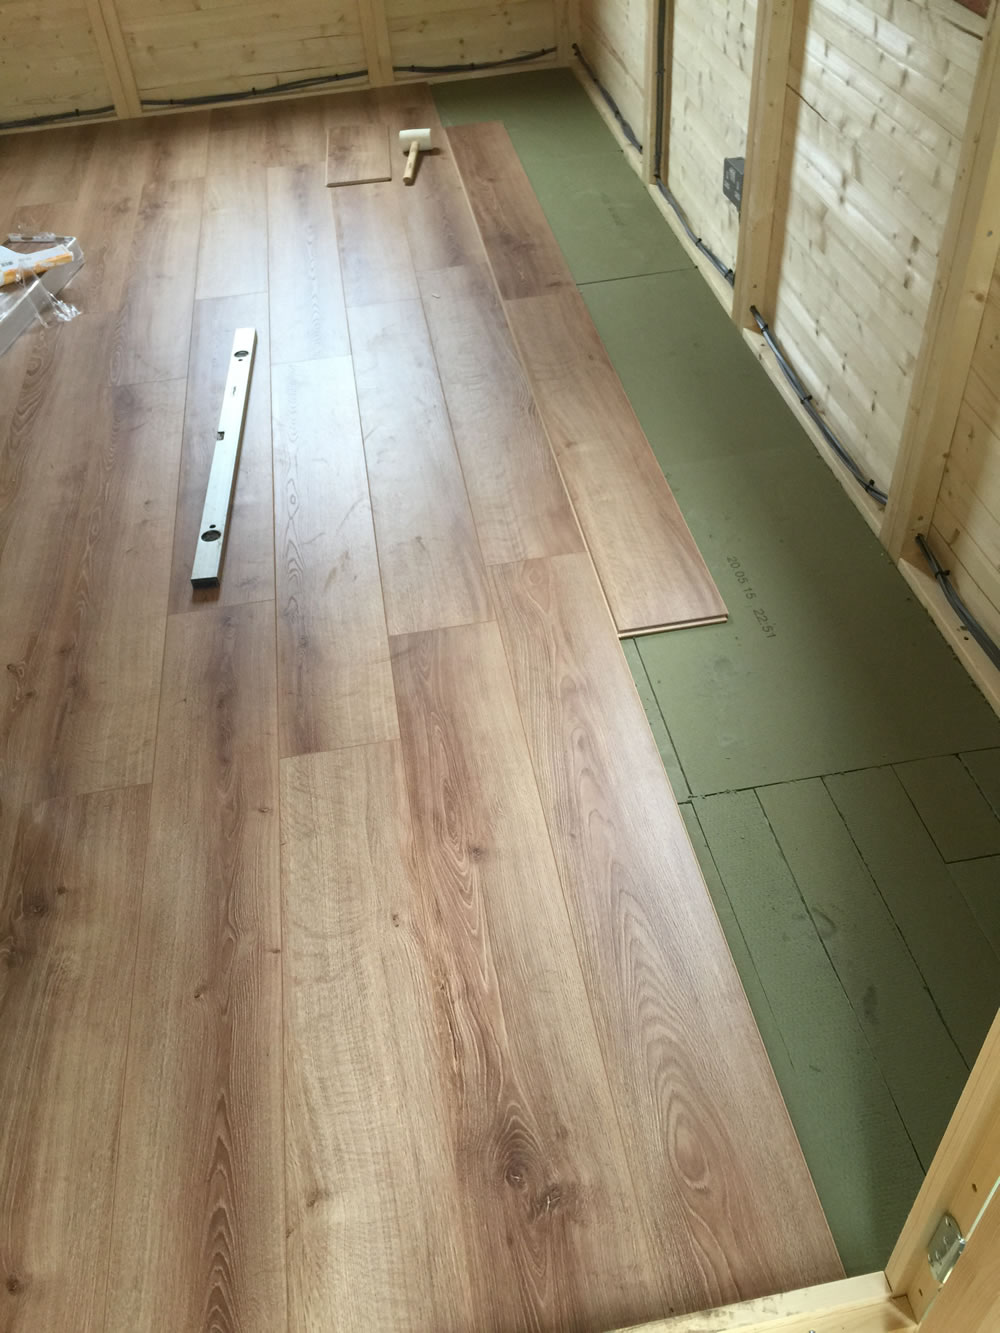 A stunning oak laminate floor fitted on top of the standard floor